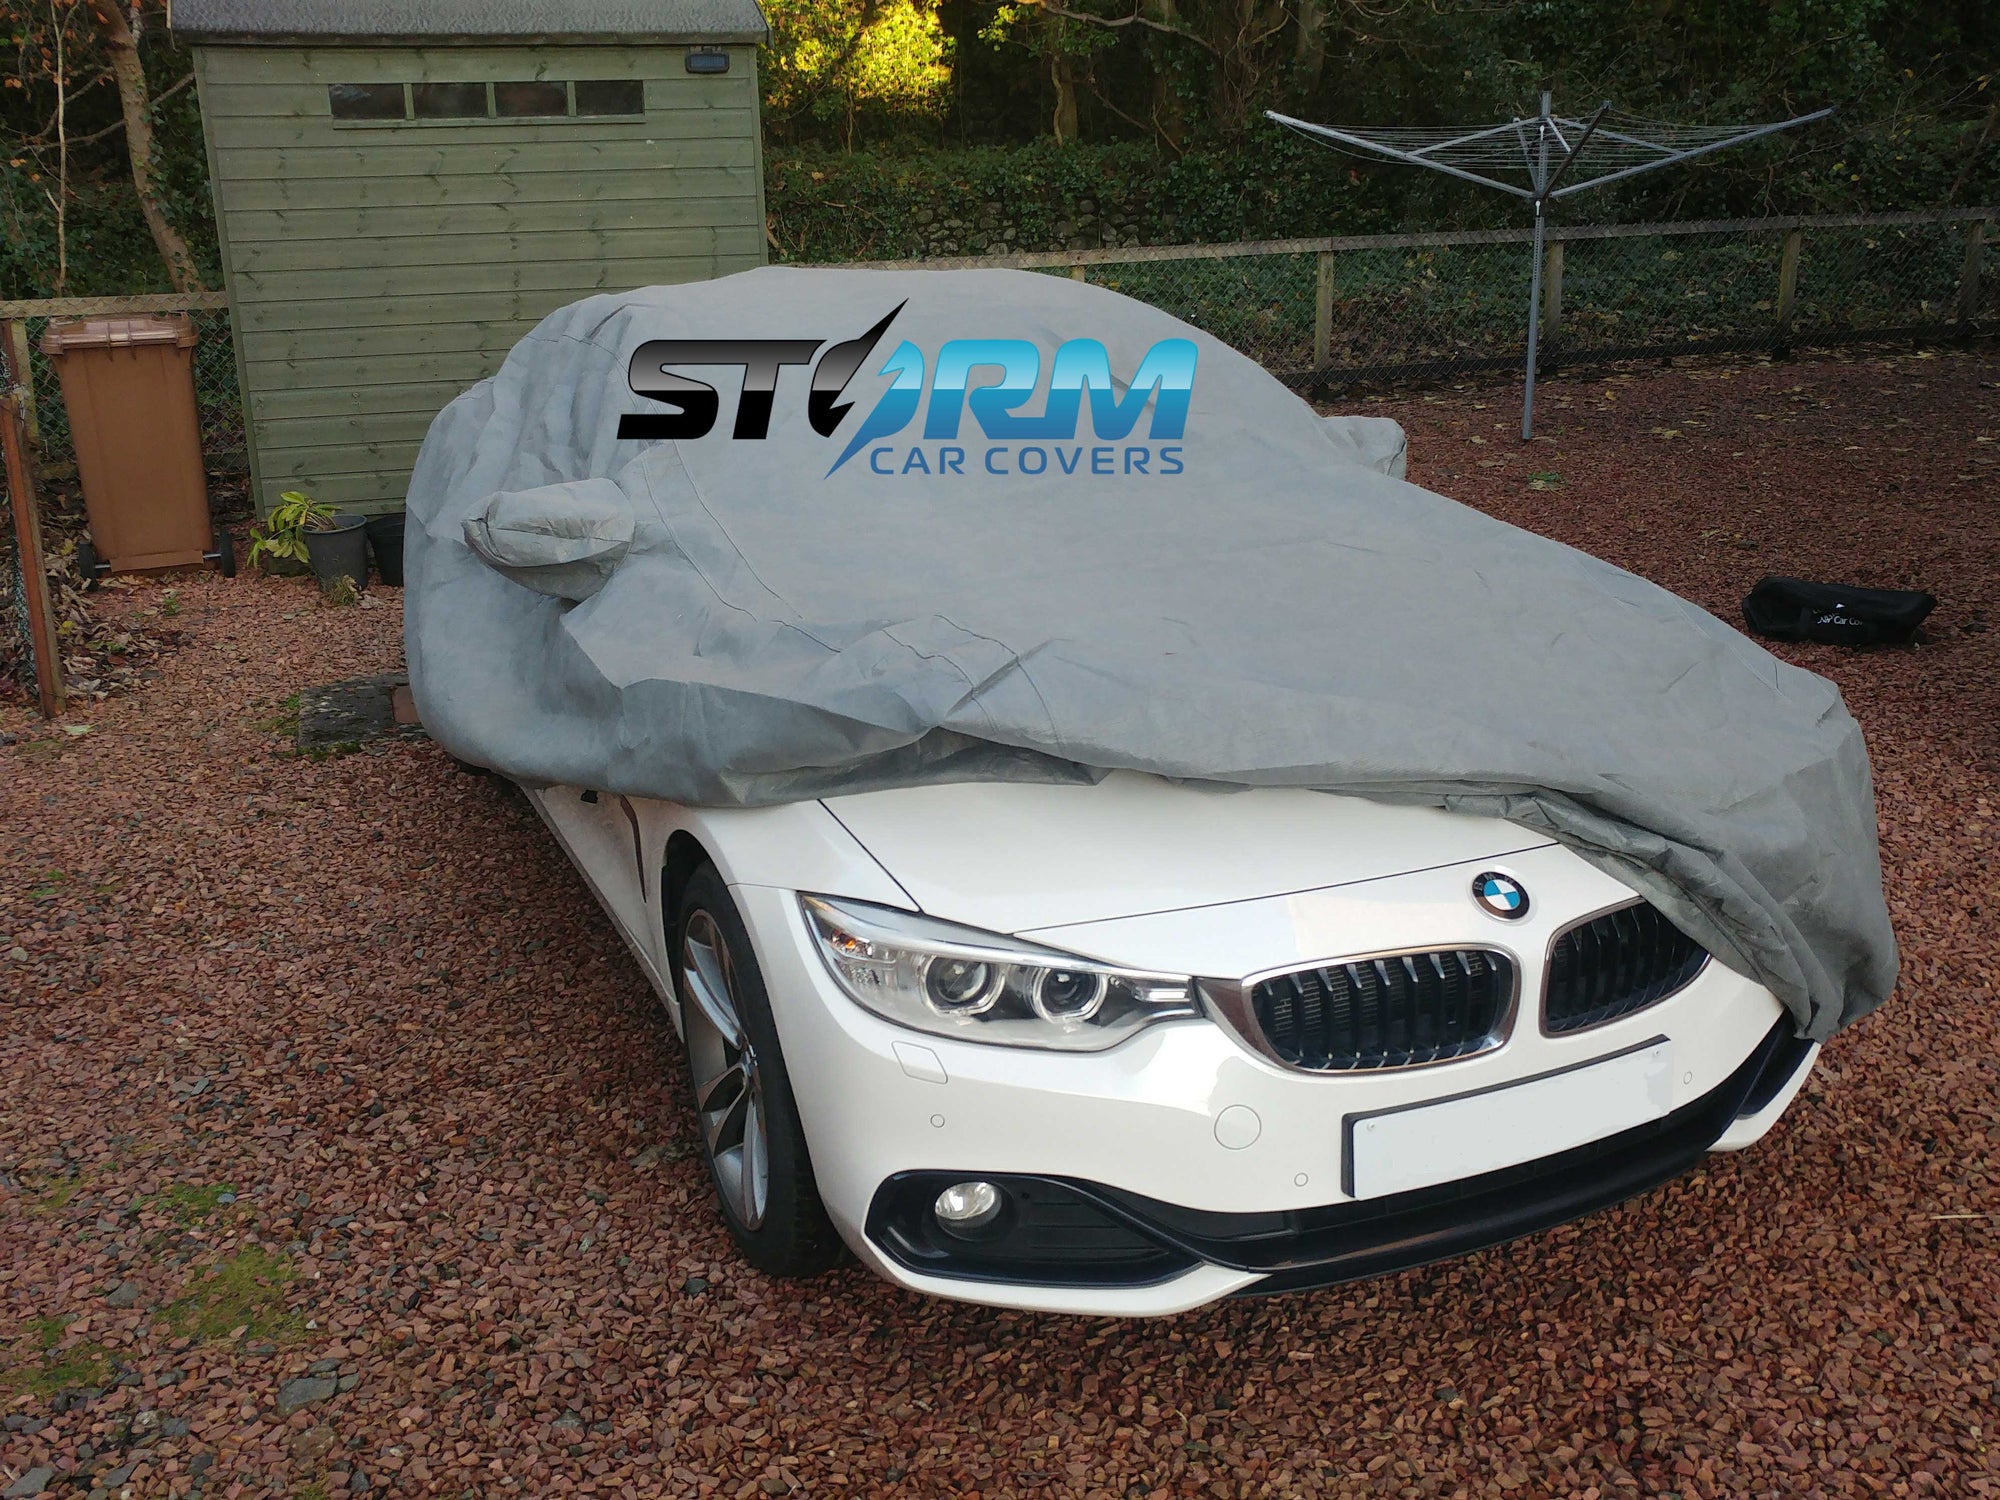 BMW Outdoor Car Covers  Tailored To Your Model & Year - Storm Car Covers